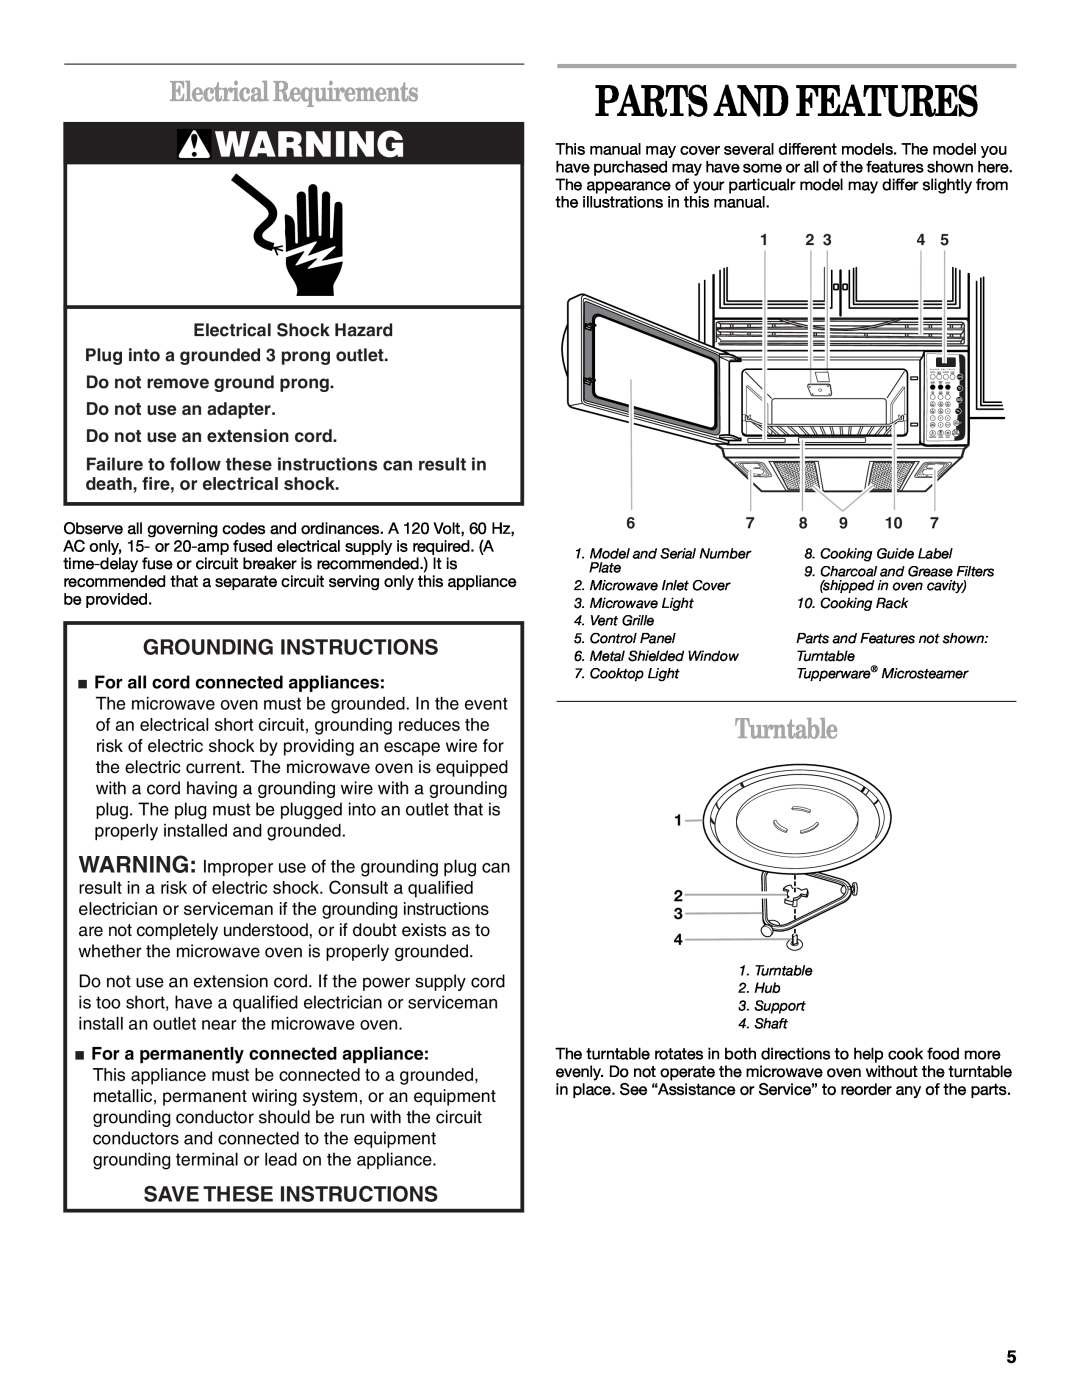 Whirlpool GH9185XL Parts And Features, Electrical Requirements, Turntable, Grounding Instructions, Save These Instructions 